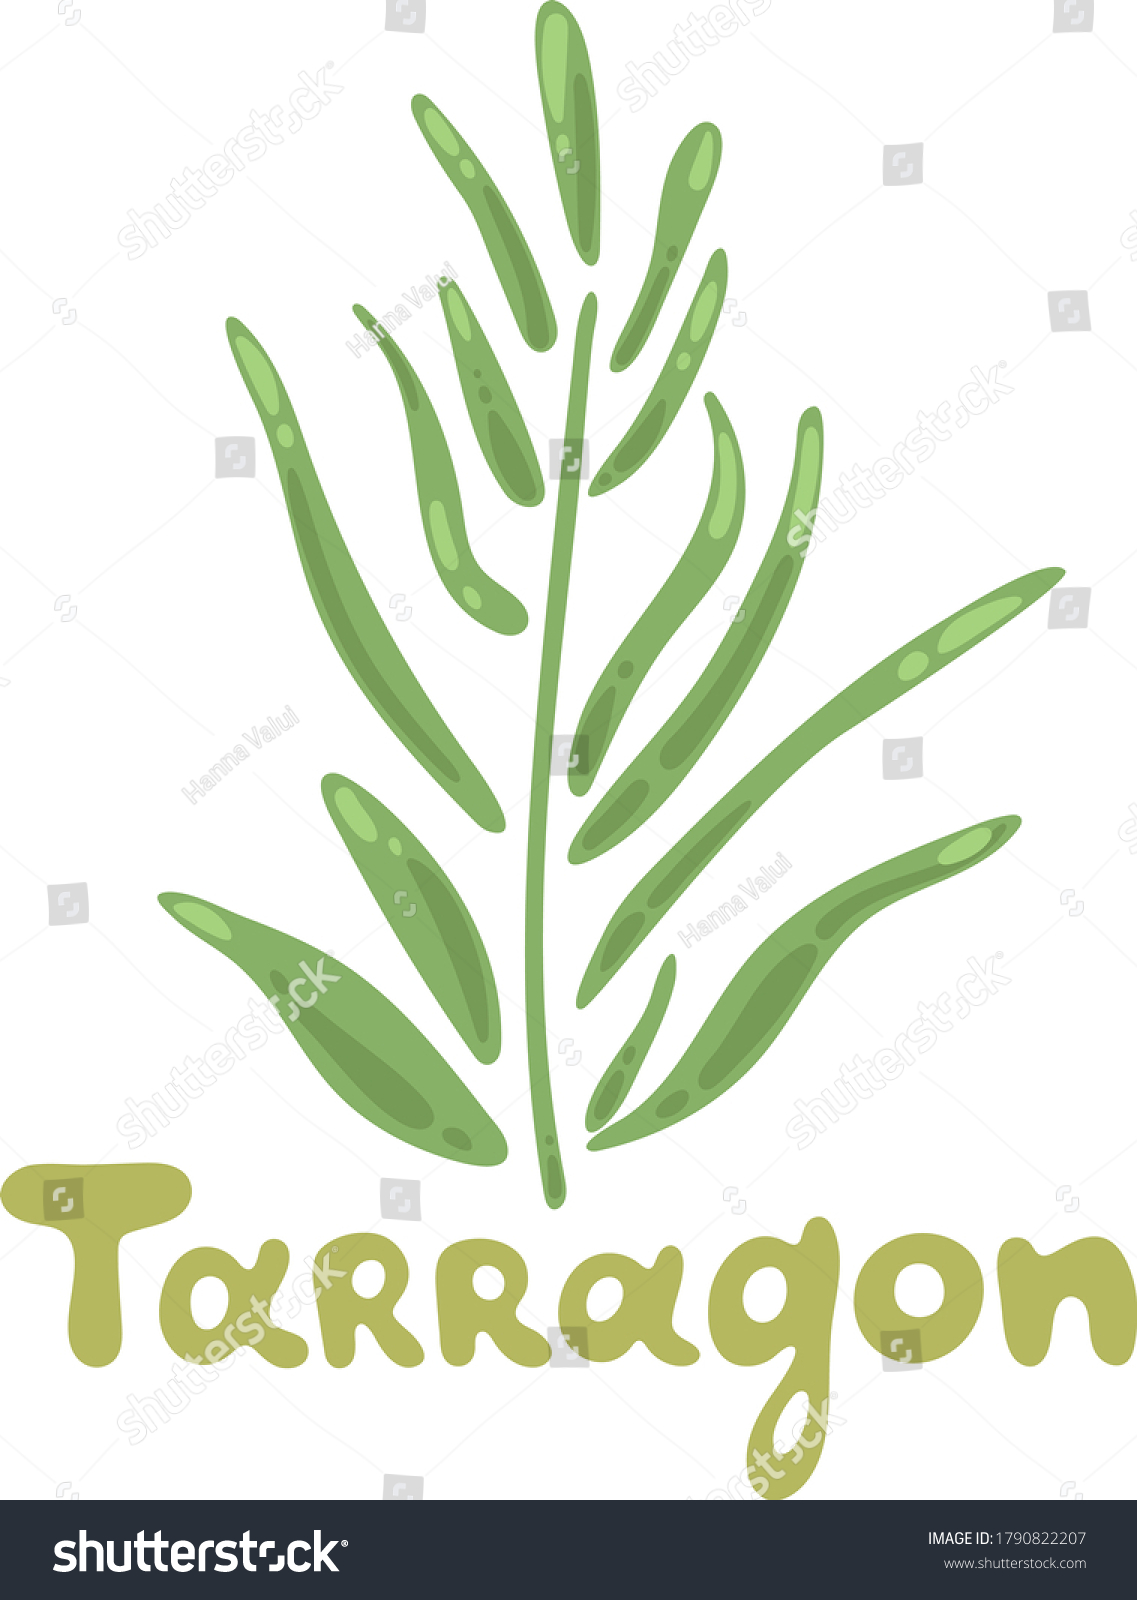 Aromatic tarragon plant, grass for home lemonade. Colorful vector healthy vegetable tarragon. Medical herb and spice. Cooking flavor ingredient. Great for label, sign, icon, cooking book. #1790822207